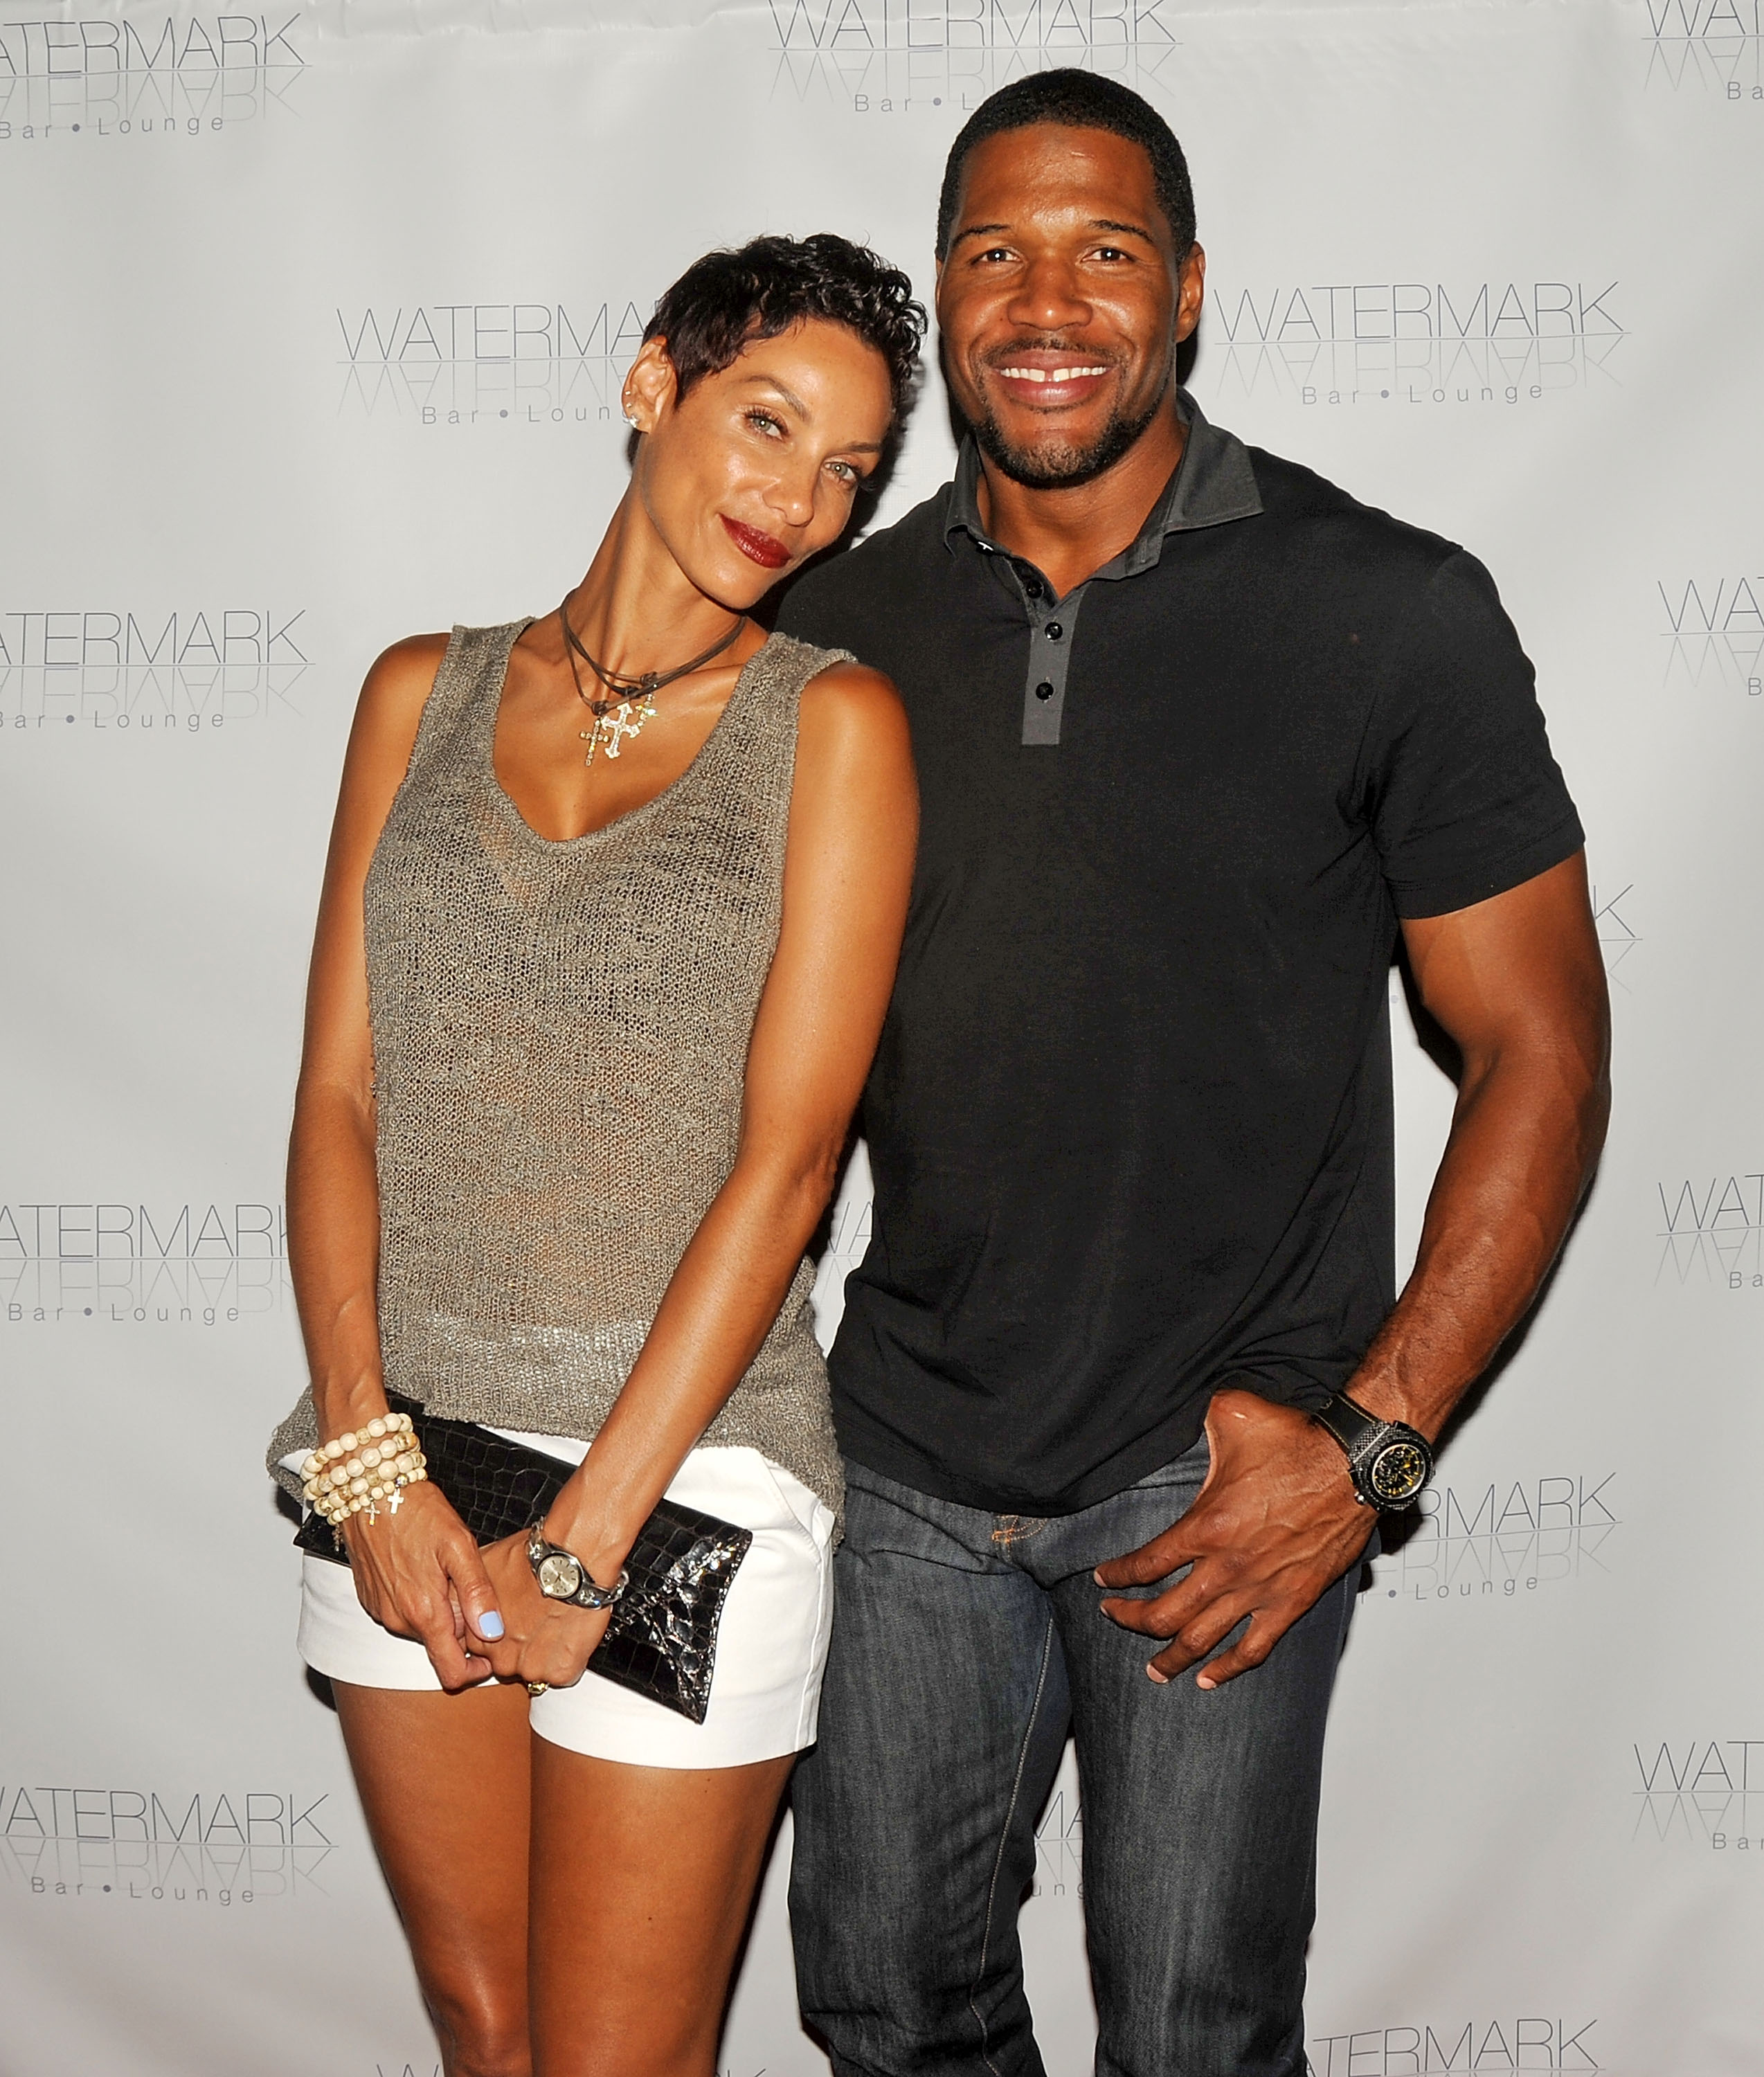 Nicole Murphy & Michael Strahan - attends the grand opening of>> Watermark Bar on July 24, 2013 in New York City.